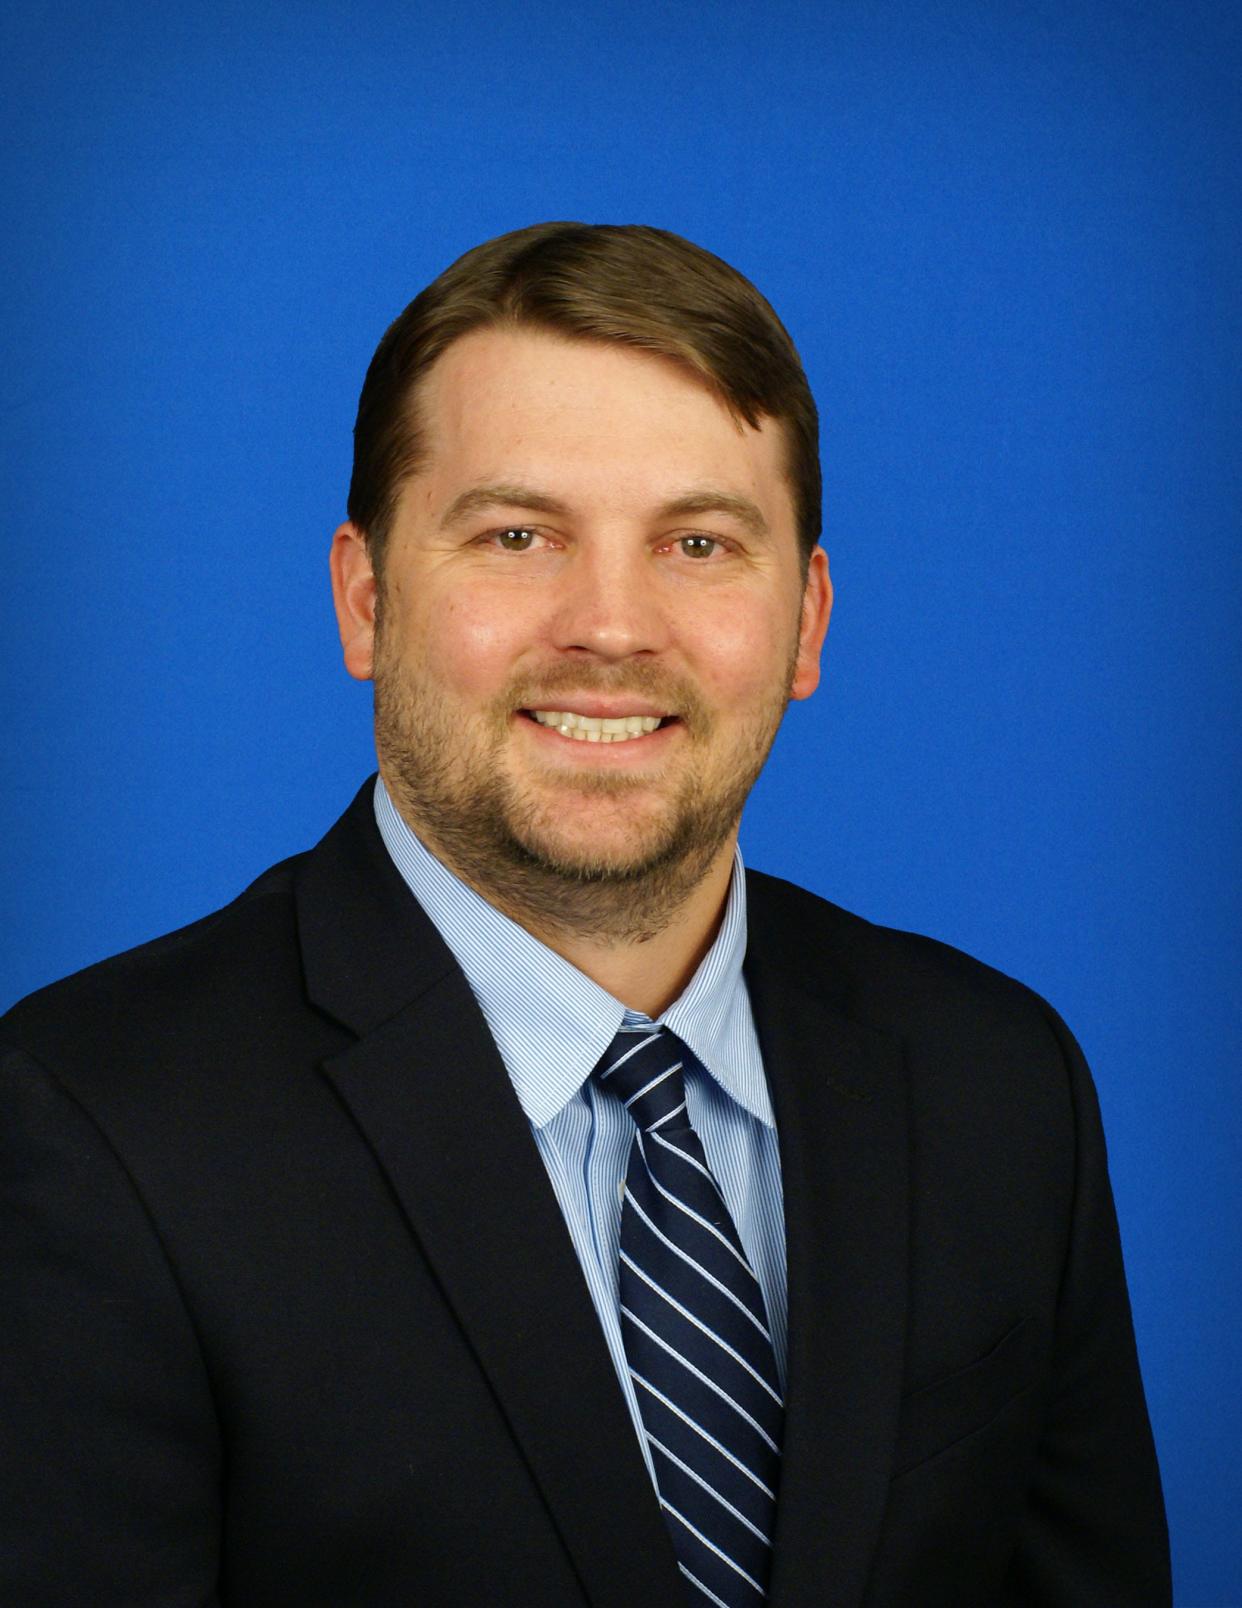 Jay Hoecker is District Water Resources Bureau Chief for Southwest Florida Water Management District.